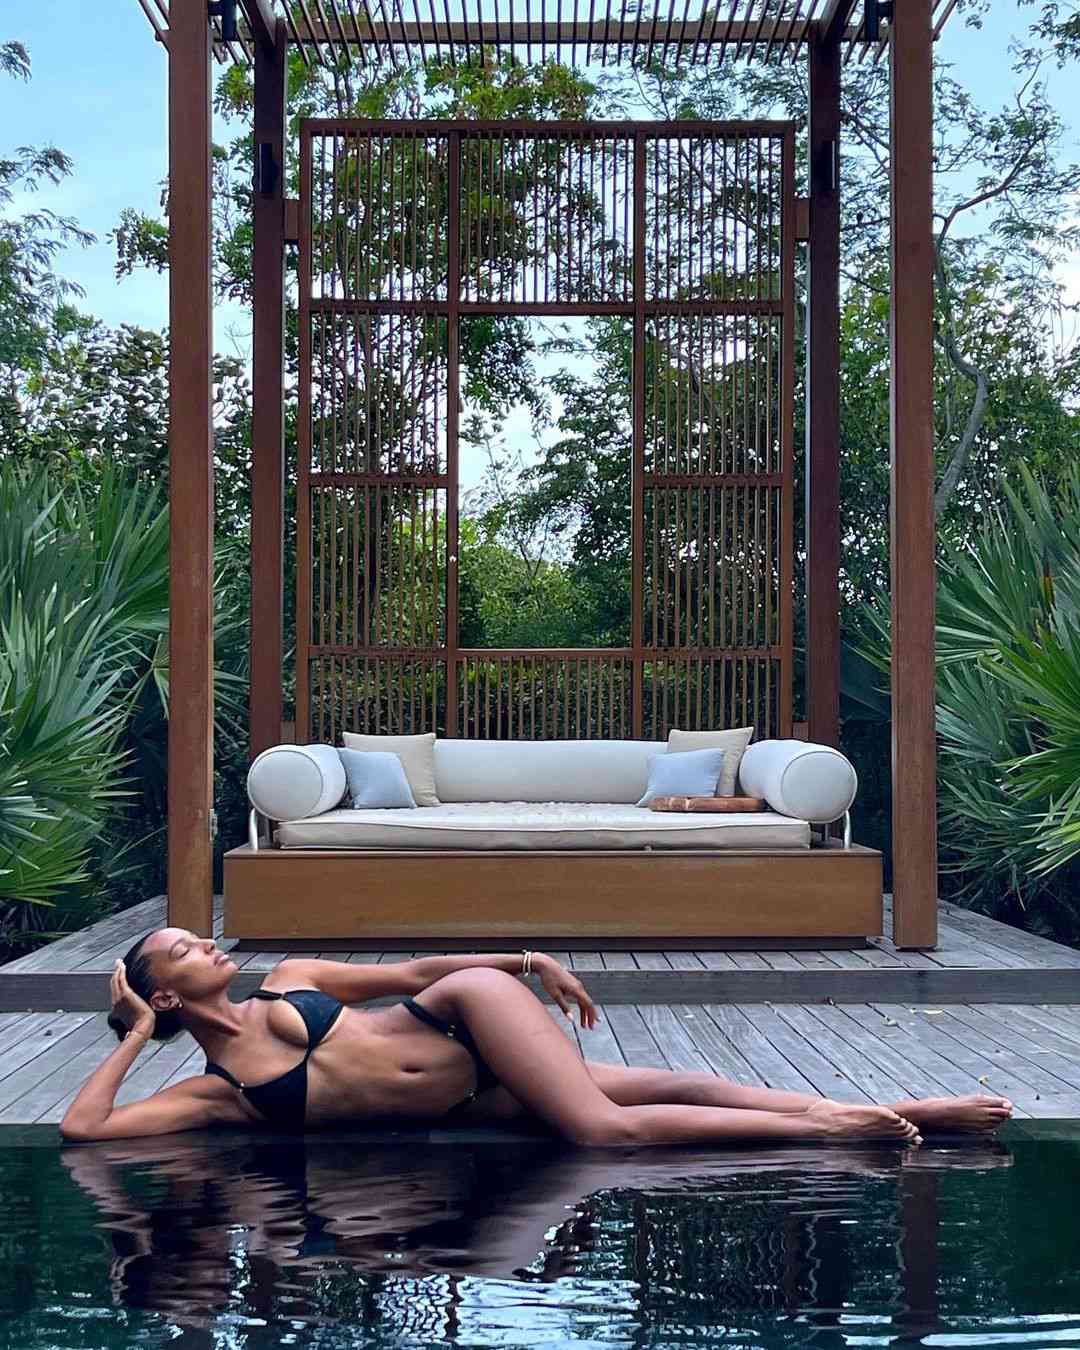 <p>The model says she "never wants to leave" her tropical poolside vacay - to which we say, who could blame her? </p>
                            